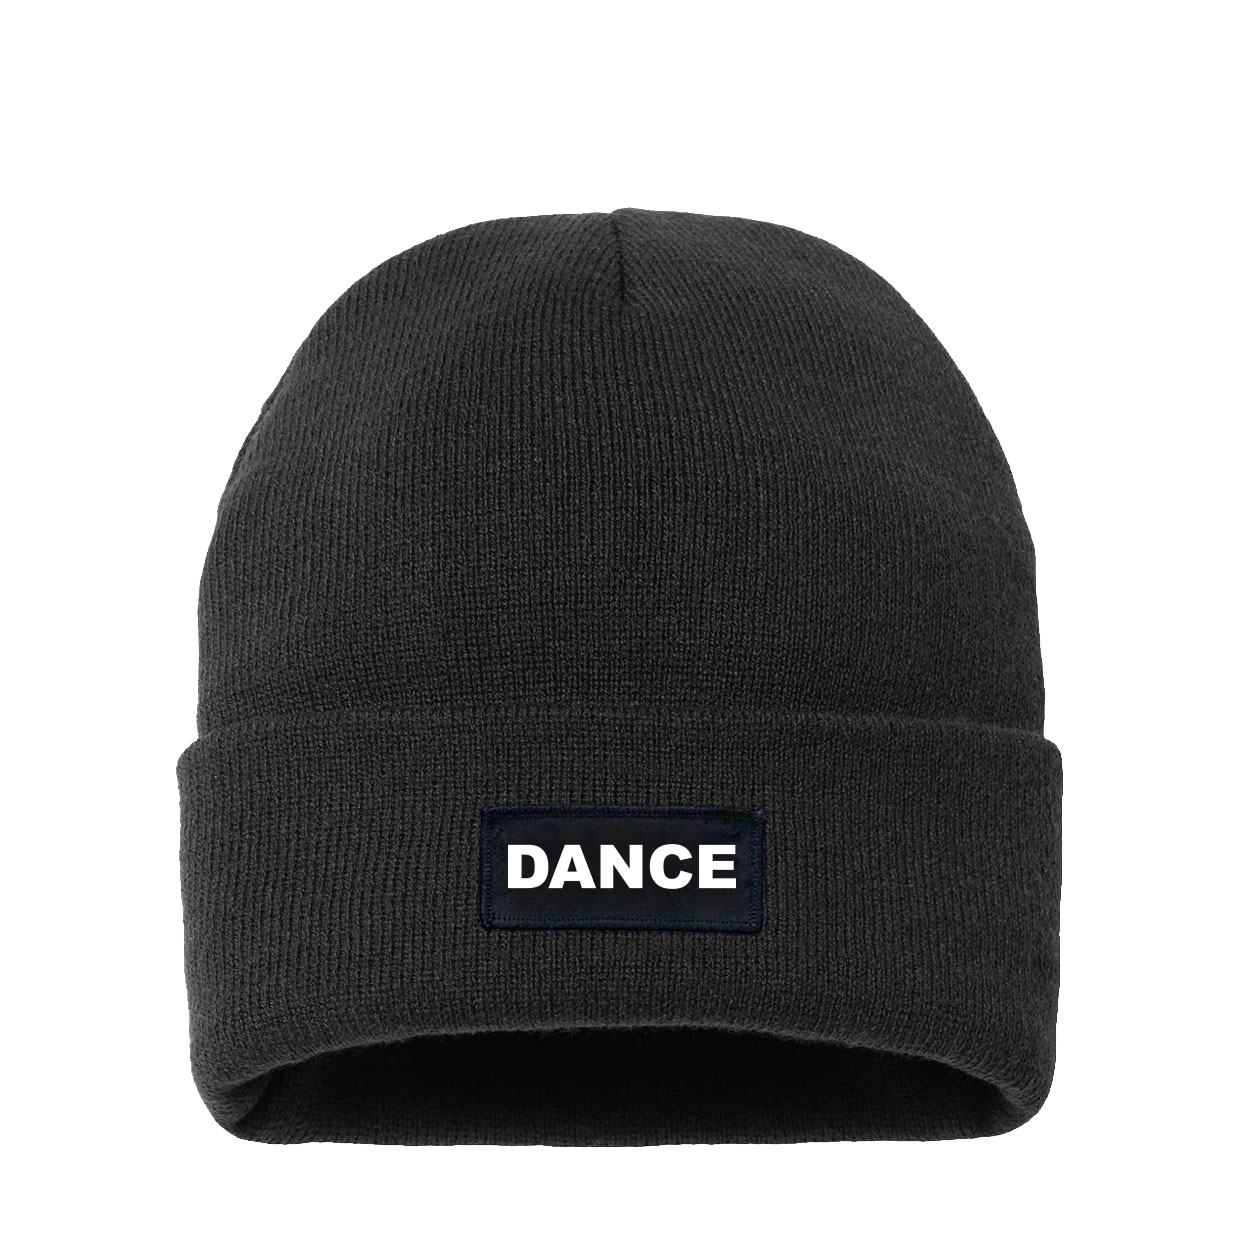 Dance Brand Logo Night Out Woven Patch Night Out Sherpa Lined Cuffed Beanie Black